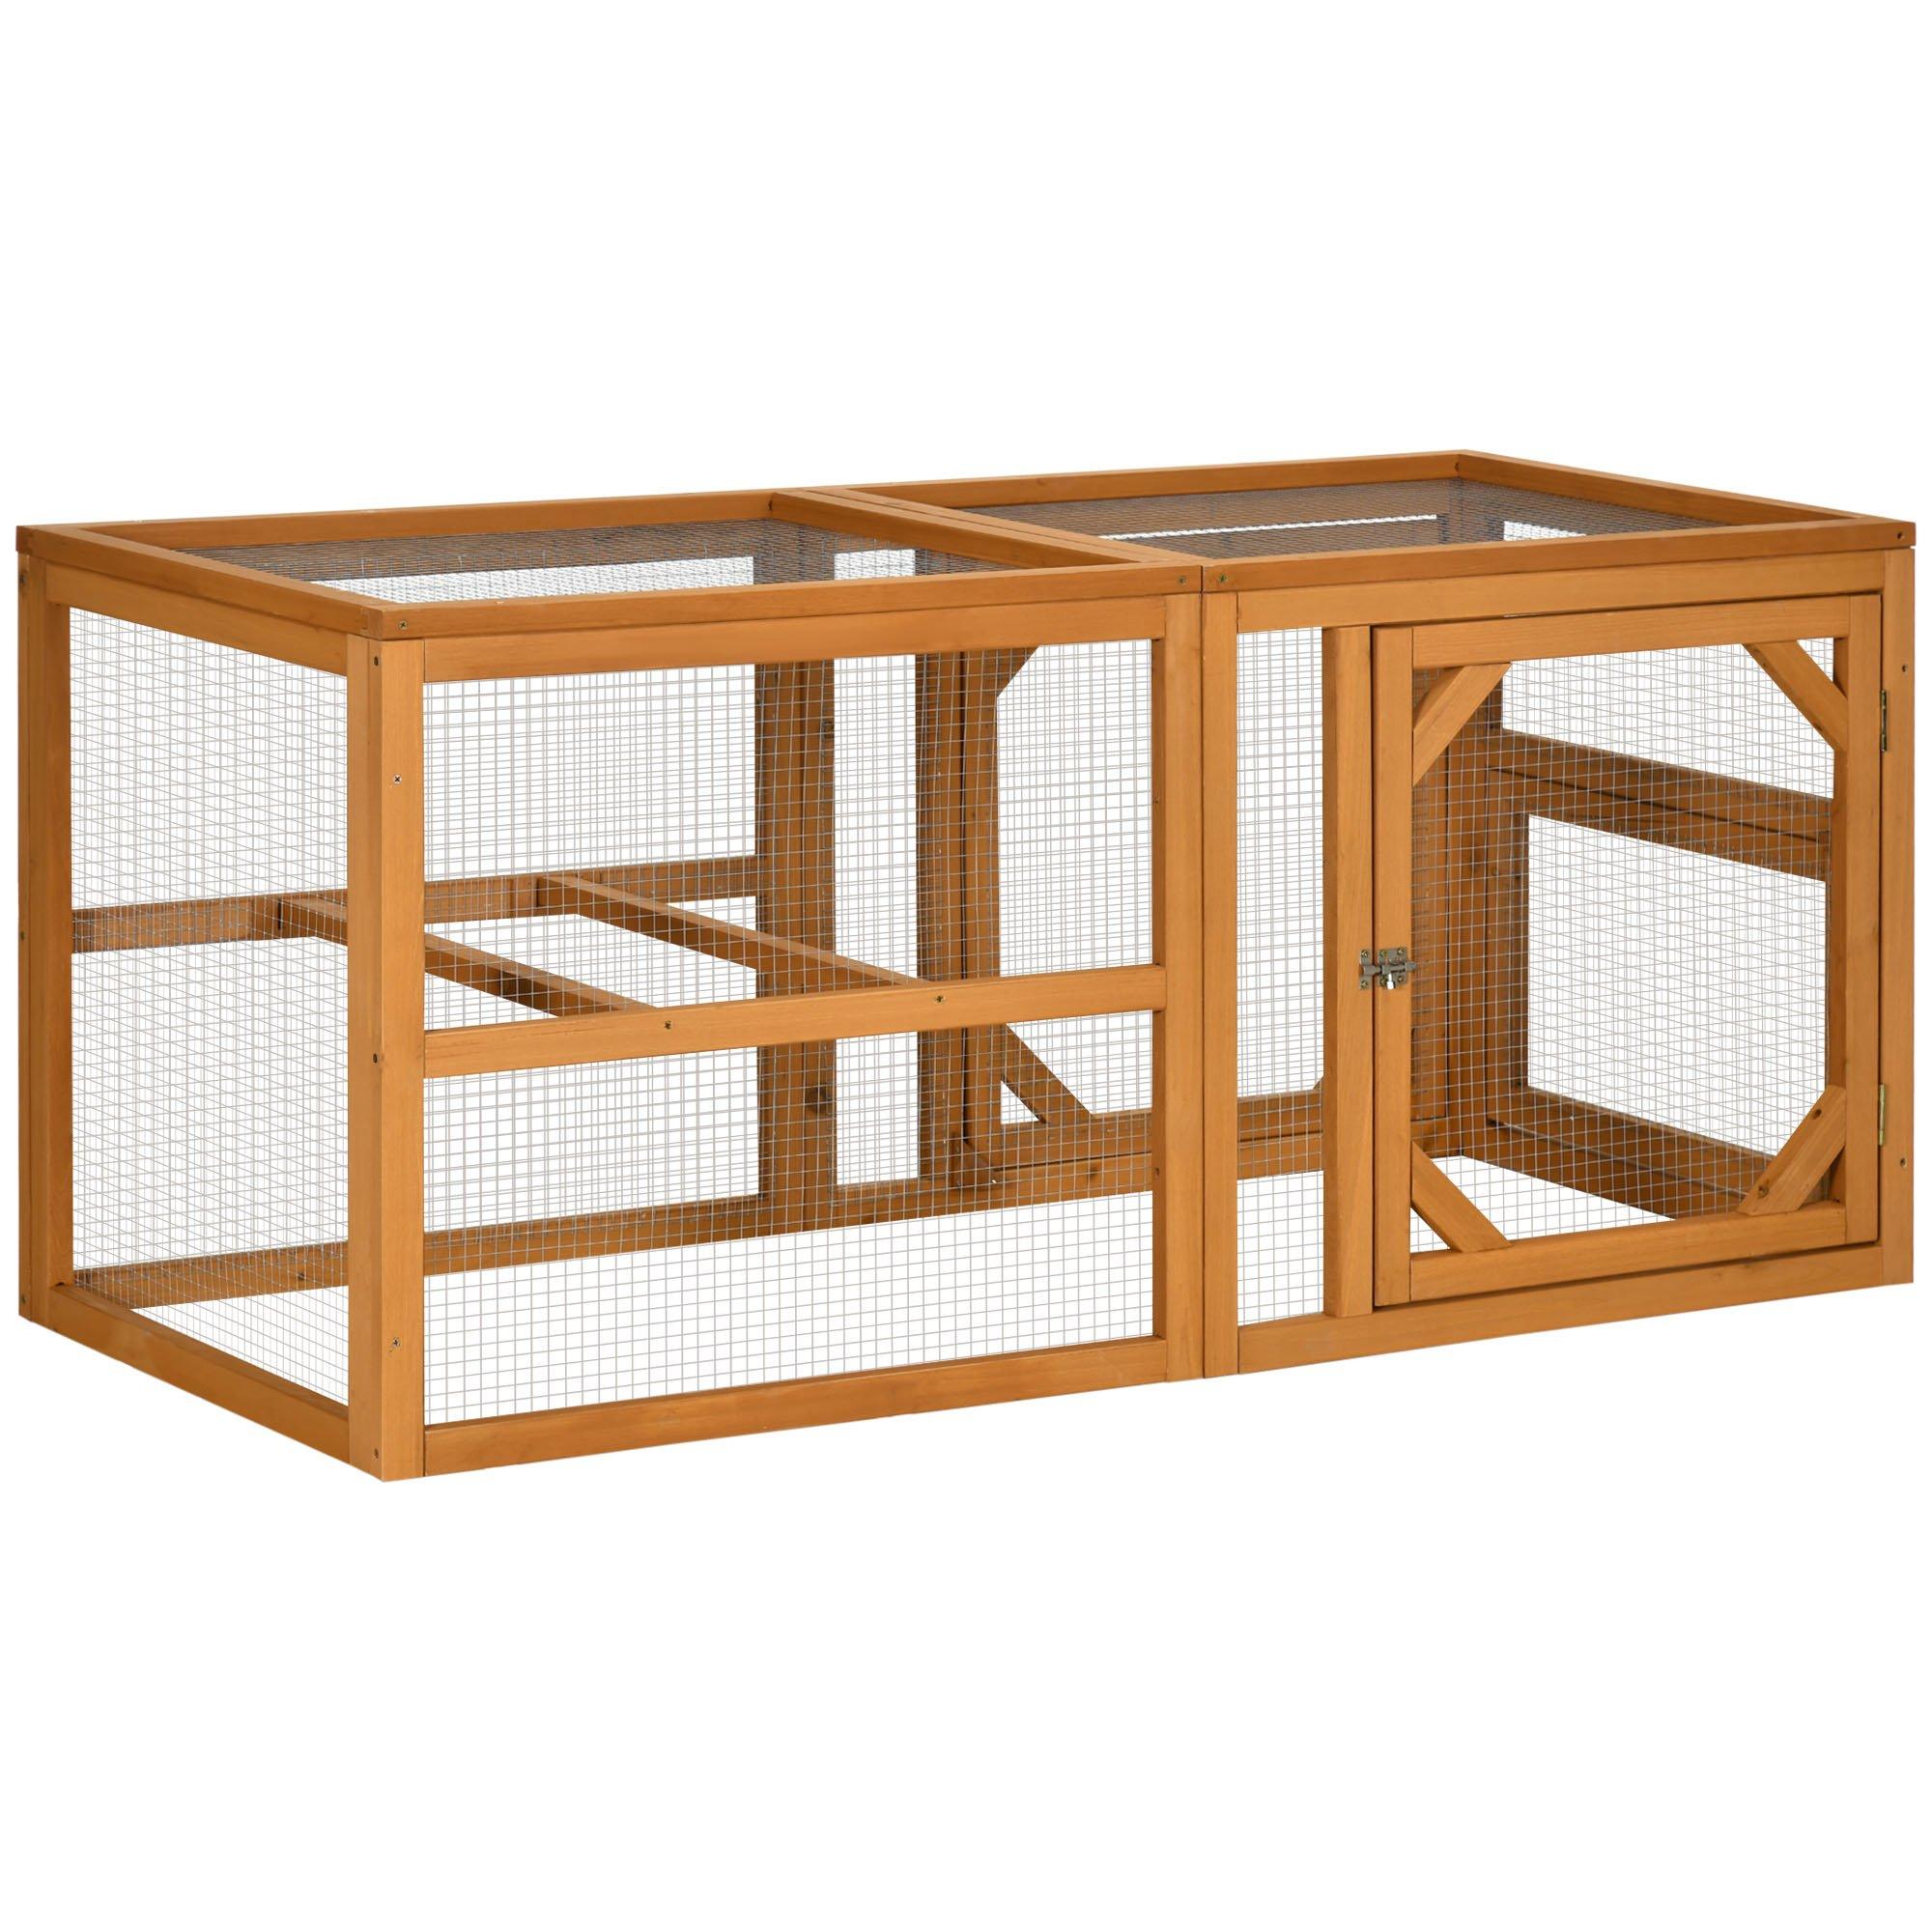 Wooden Chicken Coop w/ Perches, Doors, for 2-4 Chickens